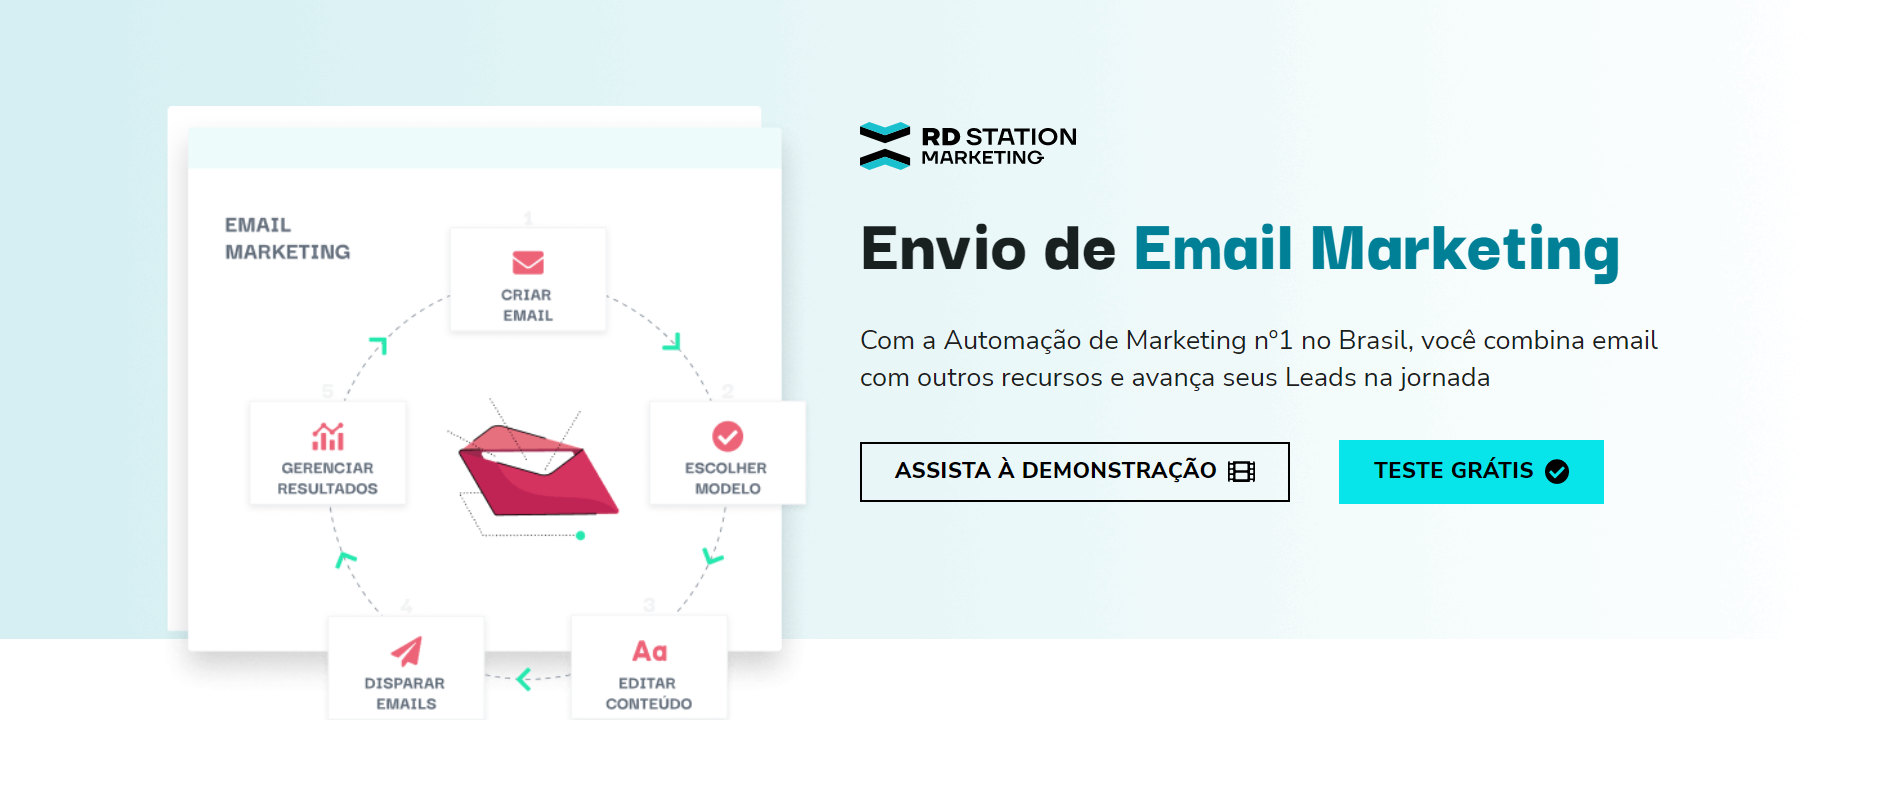 RD Station Marieting - Email marketing